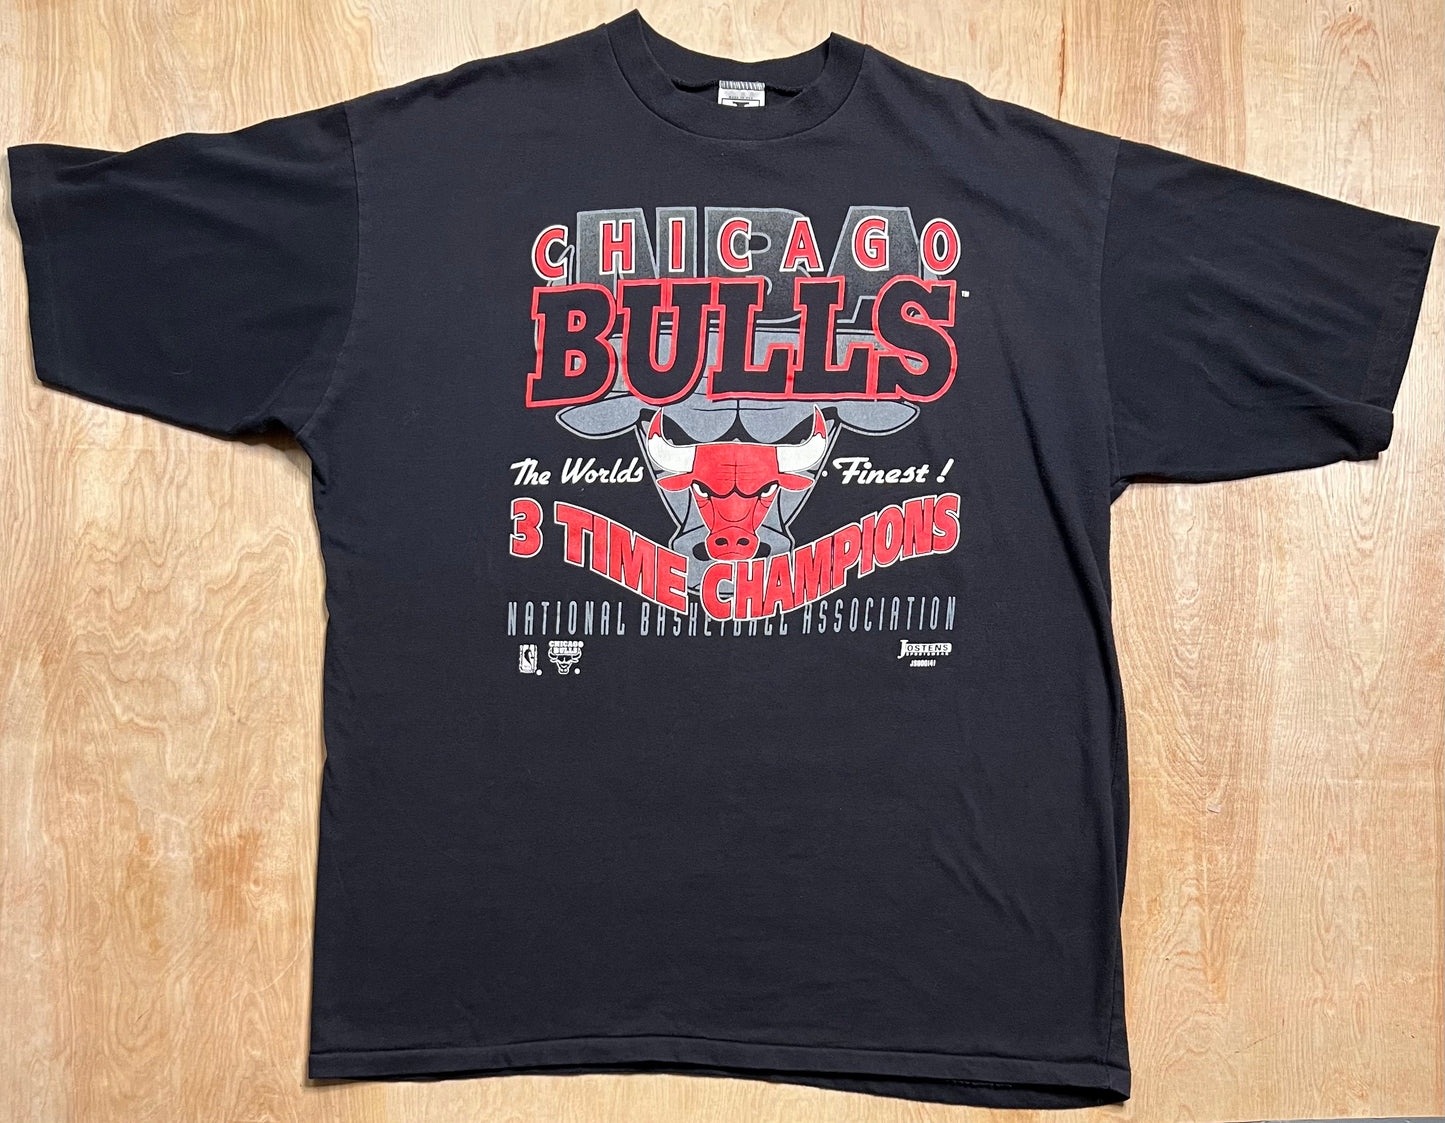 90's Chicago Bulls "The Worlds Finest" 3 Time Champions Single Stitch T-Shirt